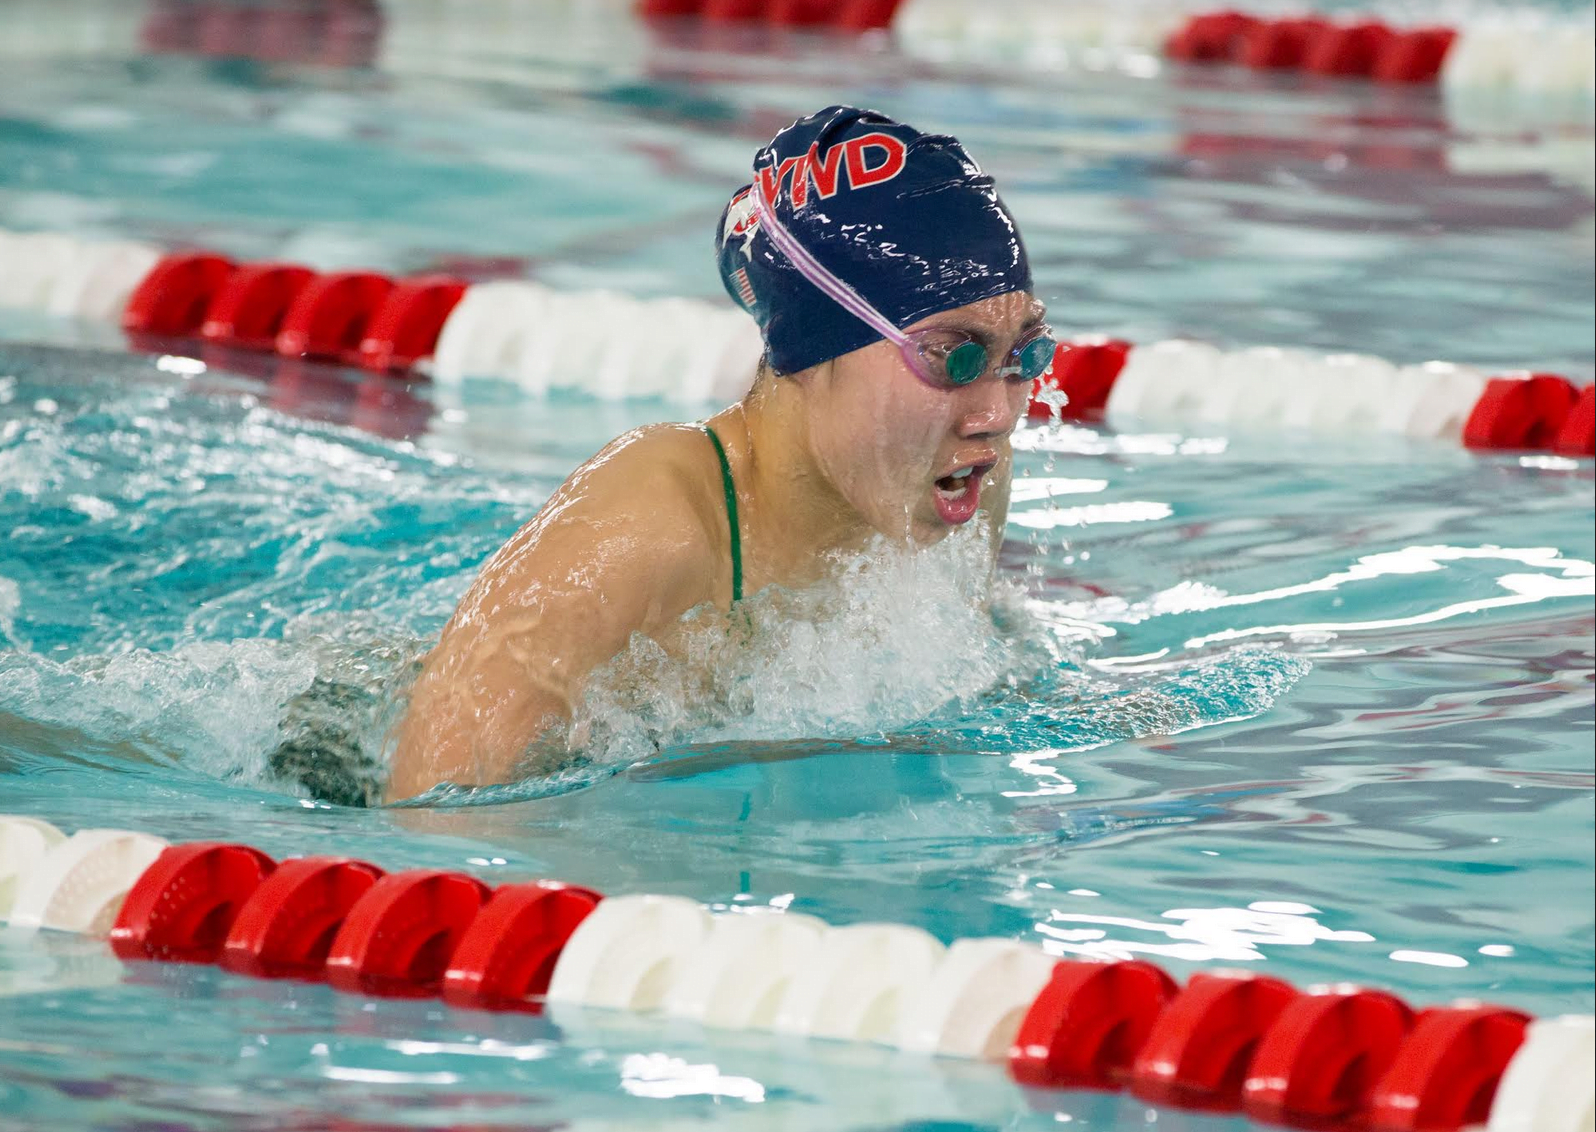 Last weekend, YWCA Greenwich hosted the 17th Annual Greenwich Town Swimming Championship Meet at Greenwich High School.